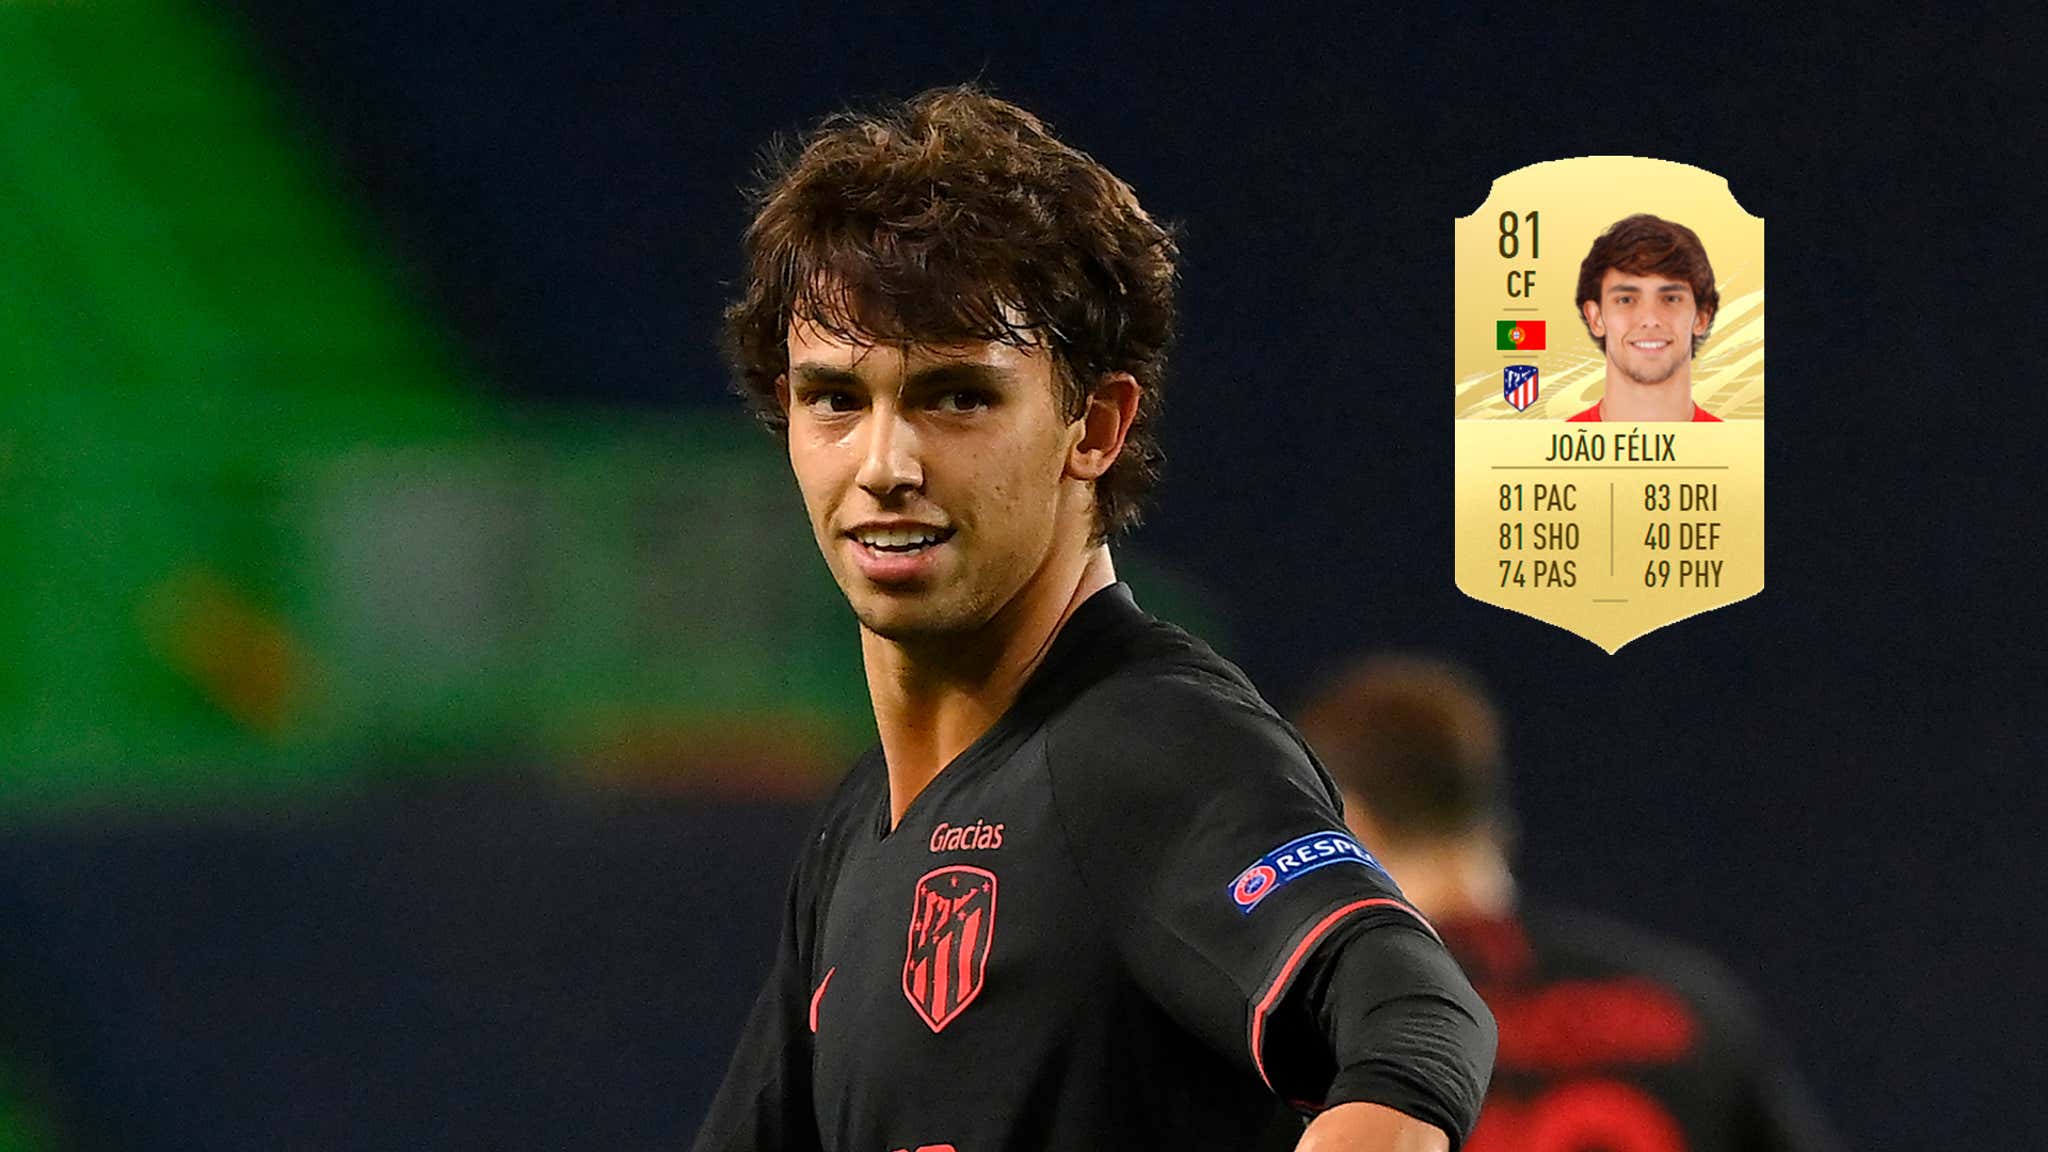 FIFA 21 best young strikers The top 50 forwards and wingers on career